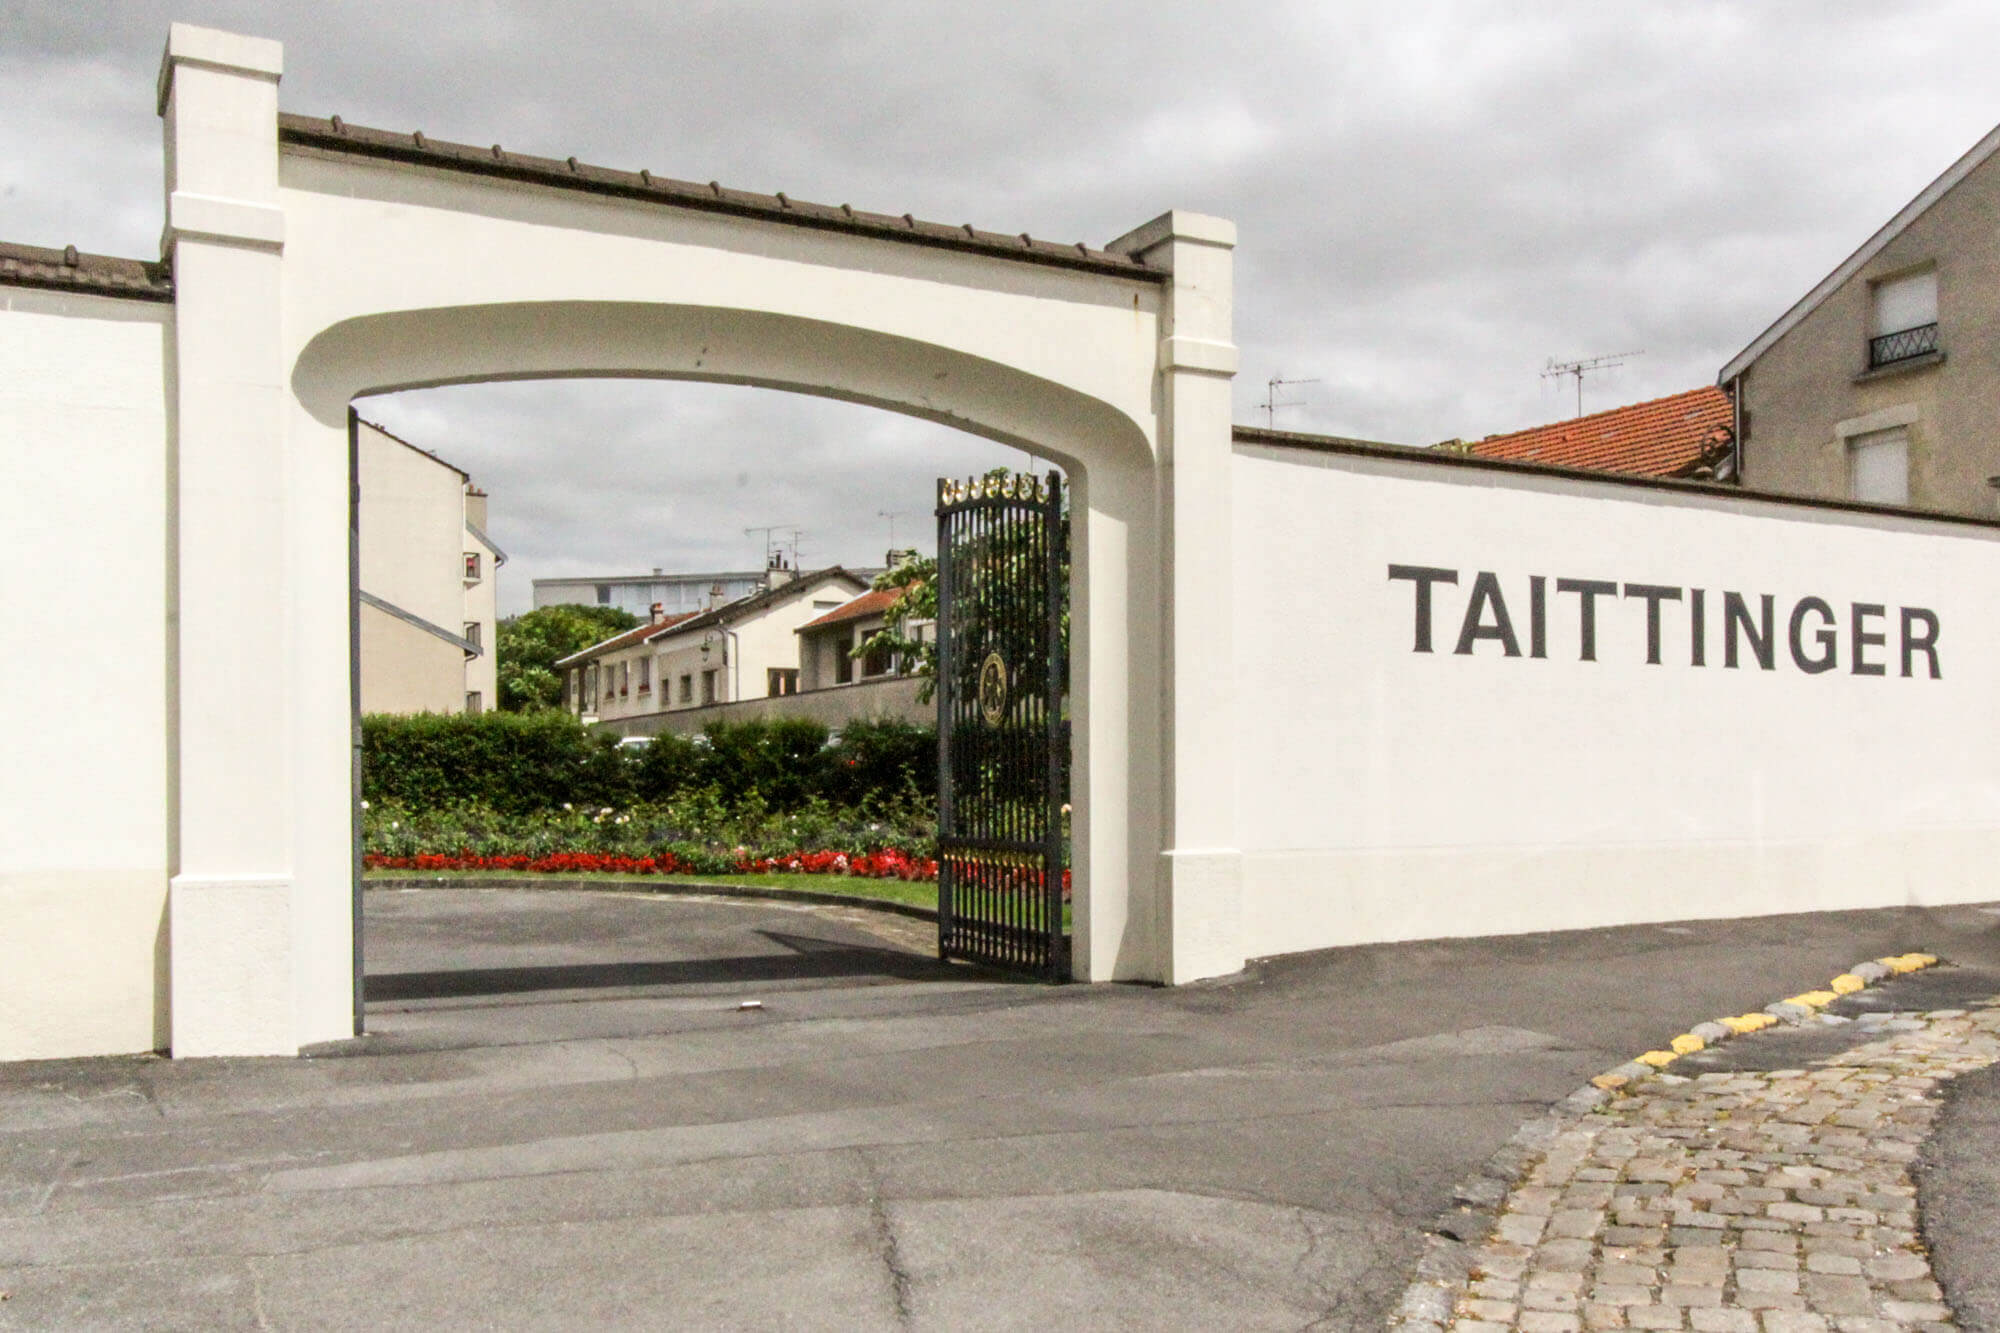 The entrance to the Taittinger Champagne house in Reims, France